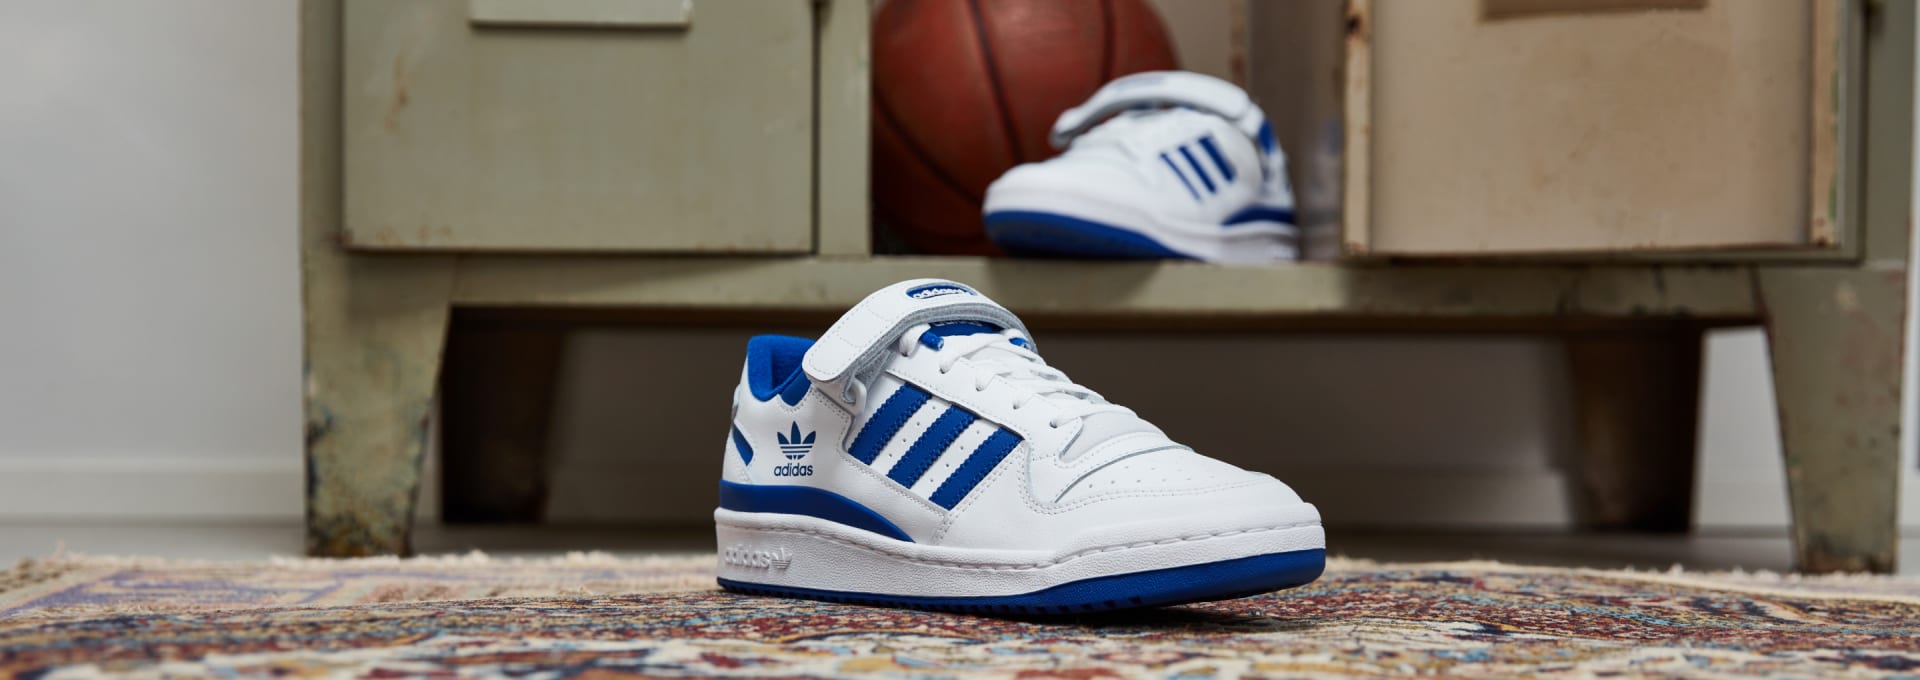 Wear your adidas Forum shoes